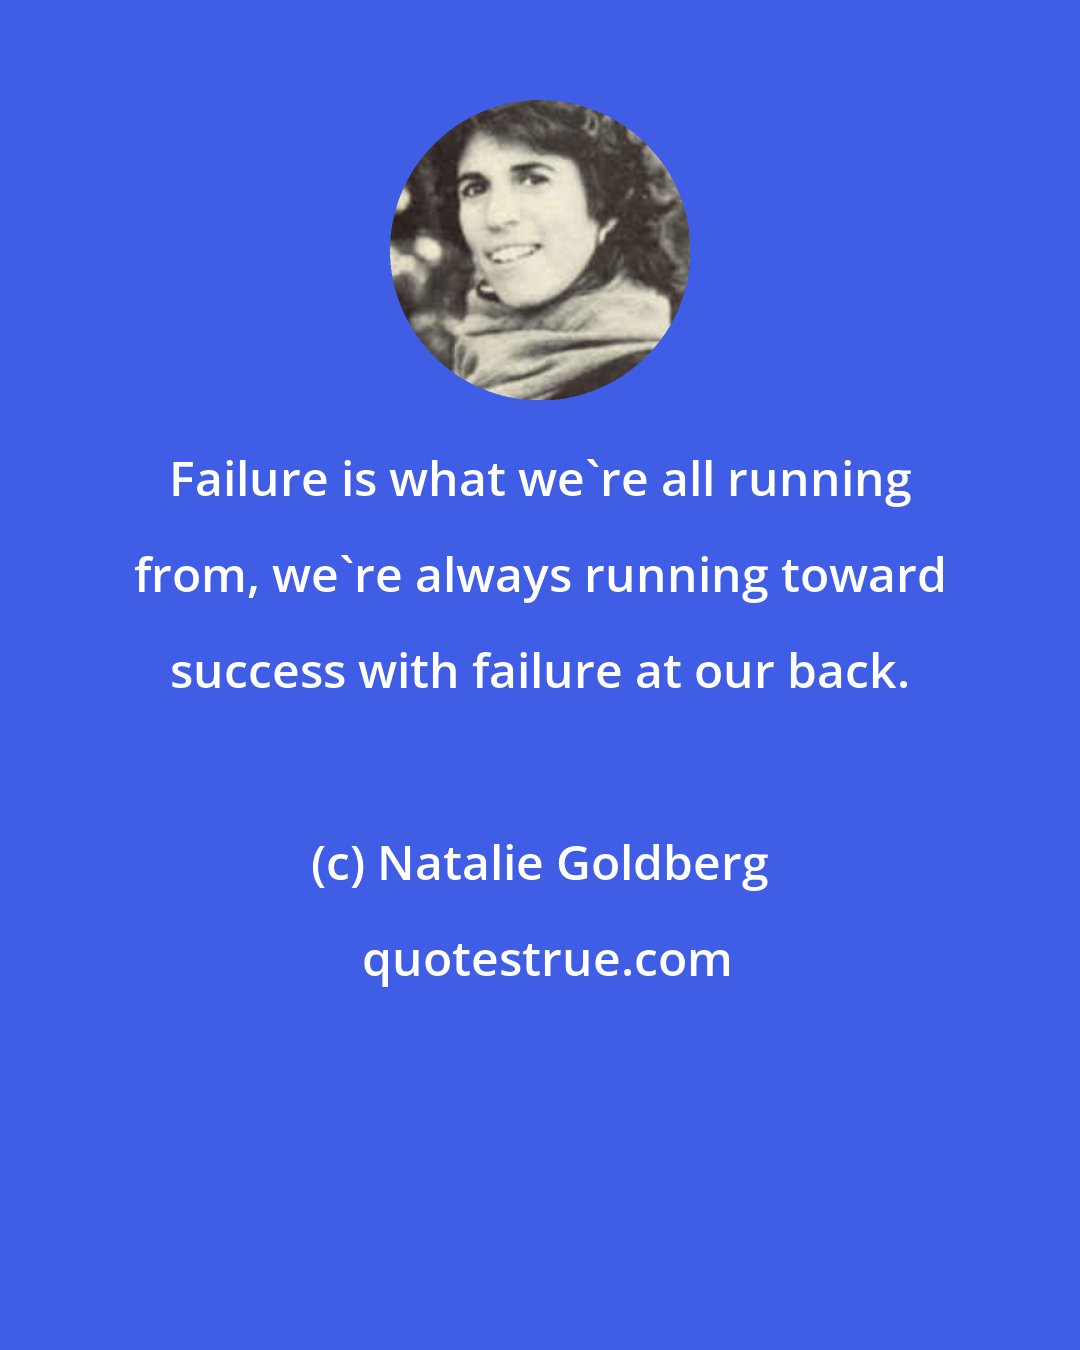 Natalie Goldberg: Failure is what we're all running from, we're always running toward success with failure at our back.